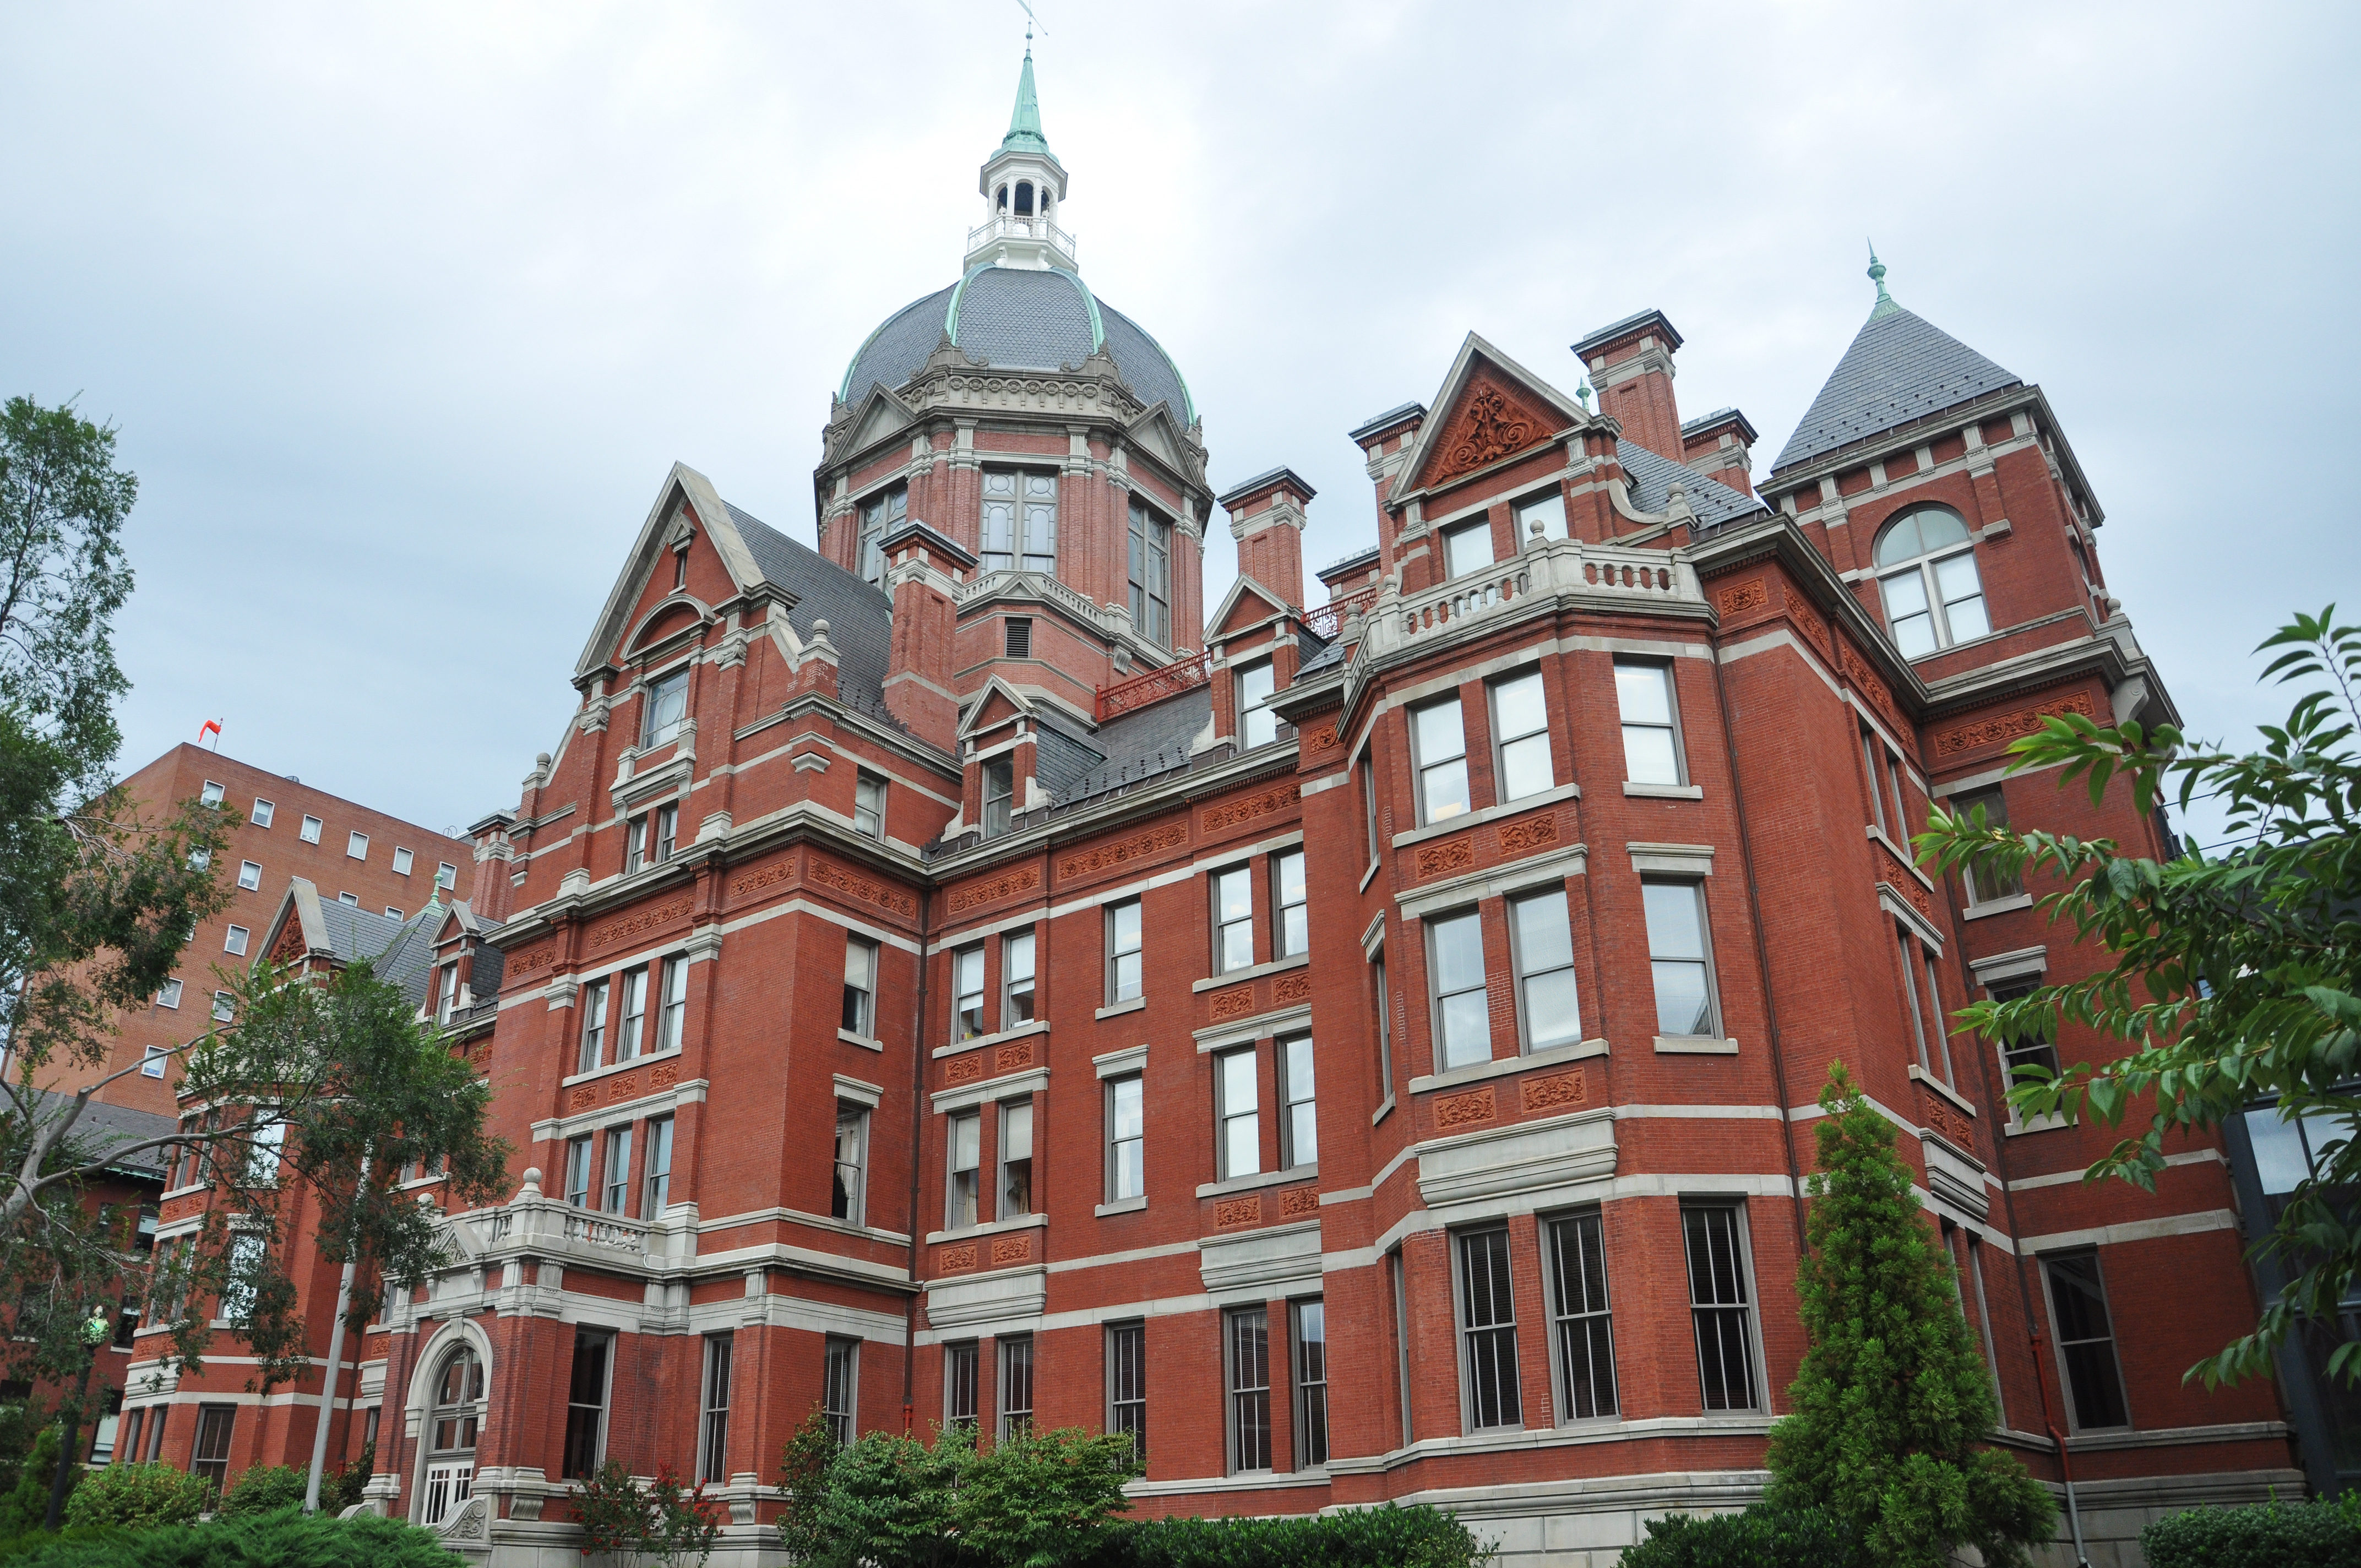 The red-brick exterior of the hospital building at Johns Hopkins University